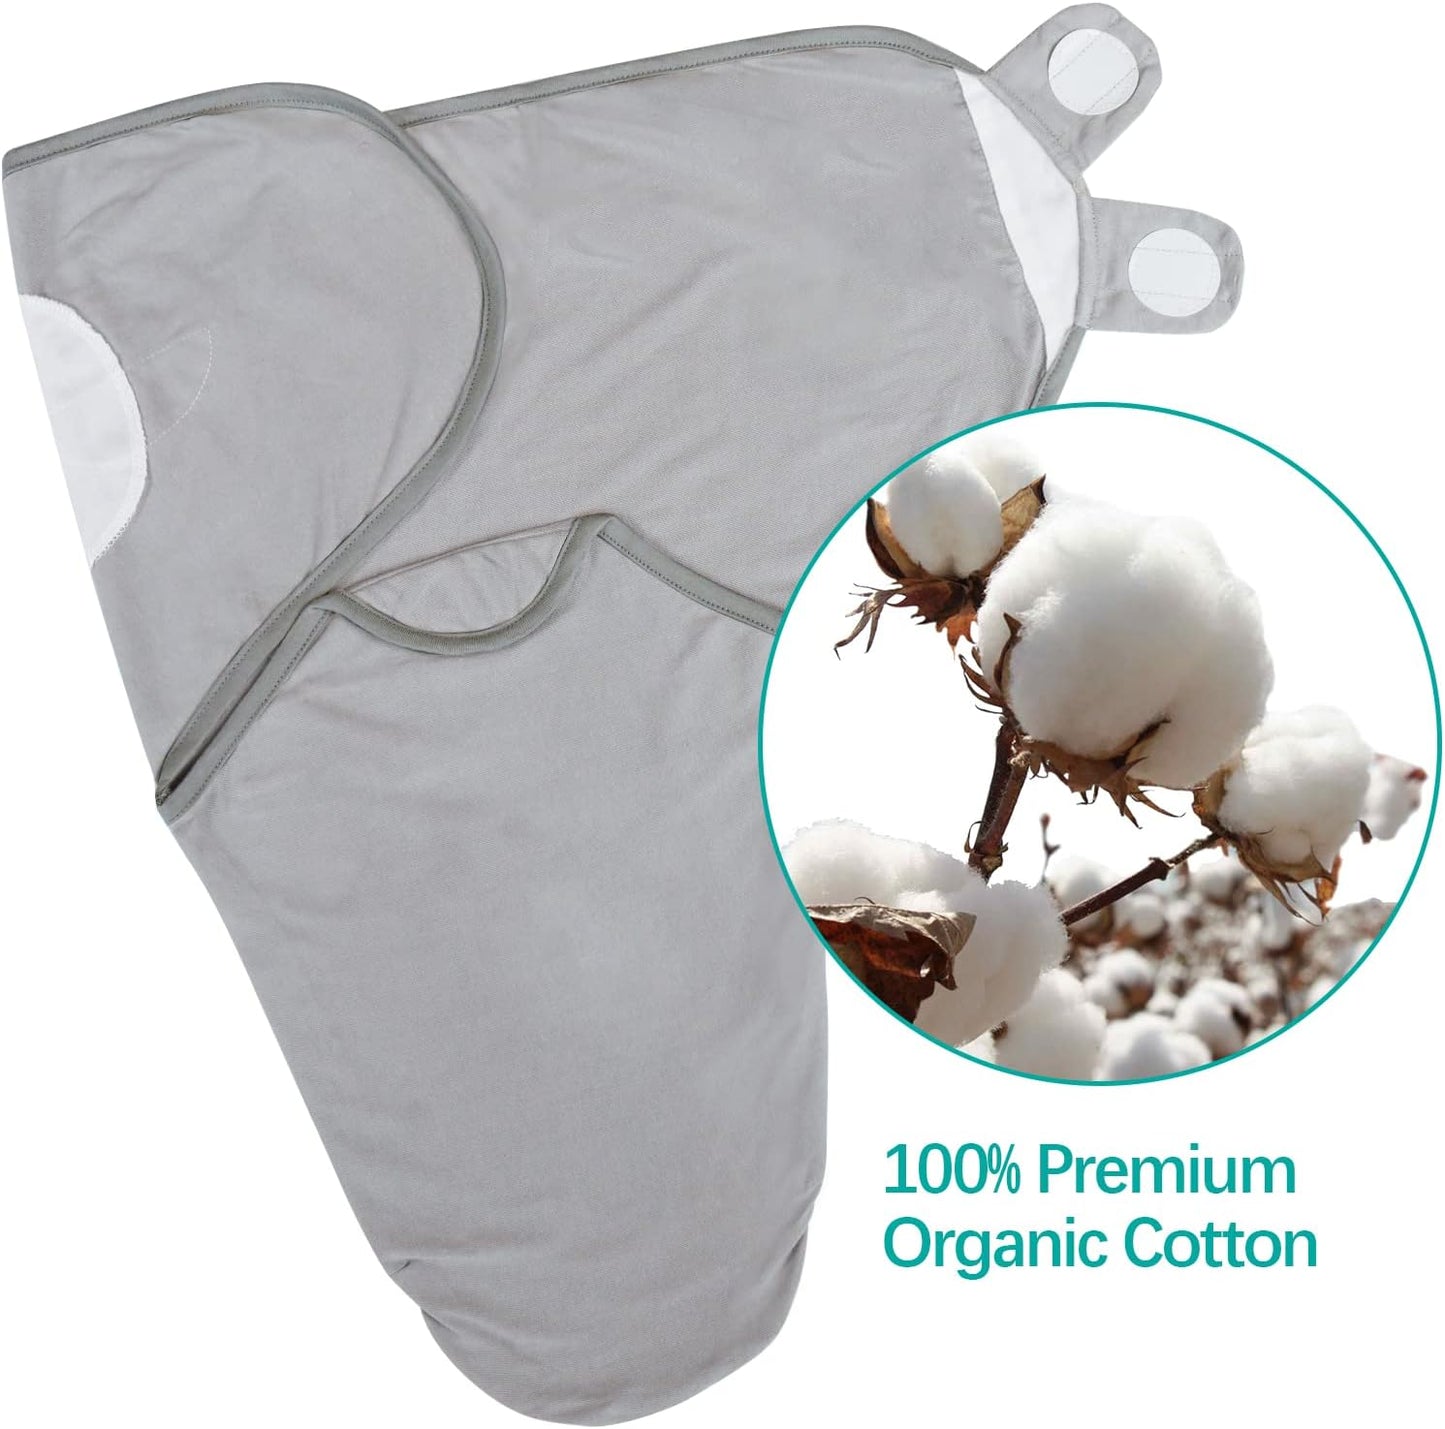 Baby Swaddles - for Newborn 0-3 Months, 4 Pack, 100% Organic Cotton, Grey & Navy